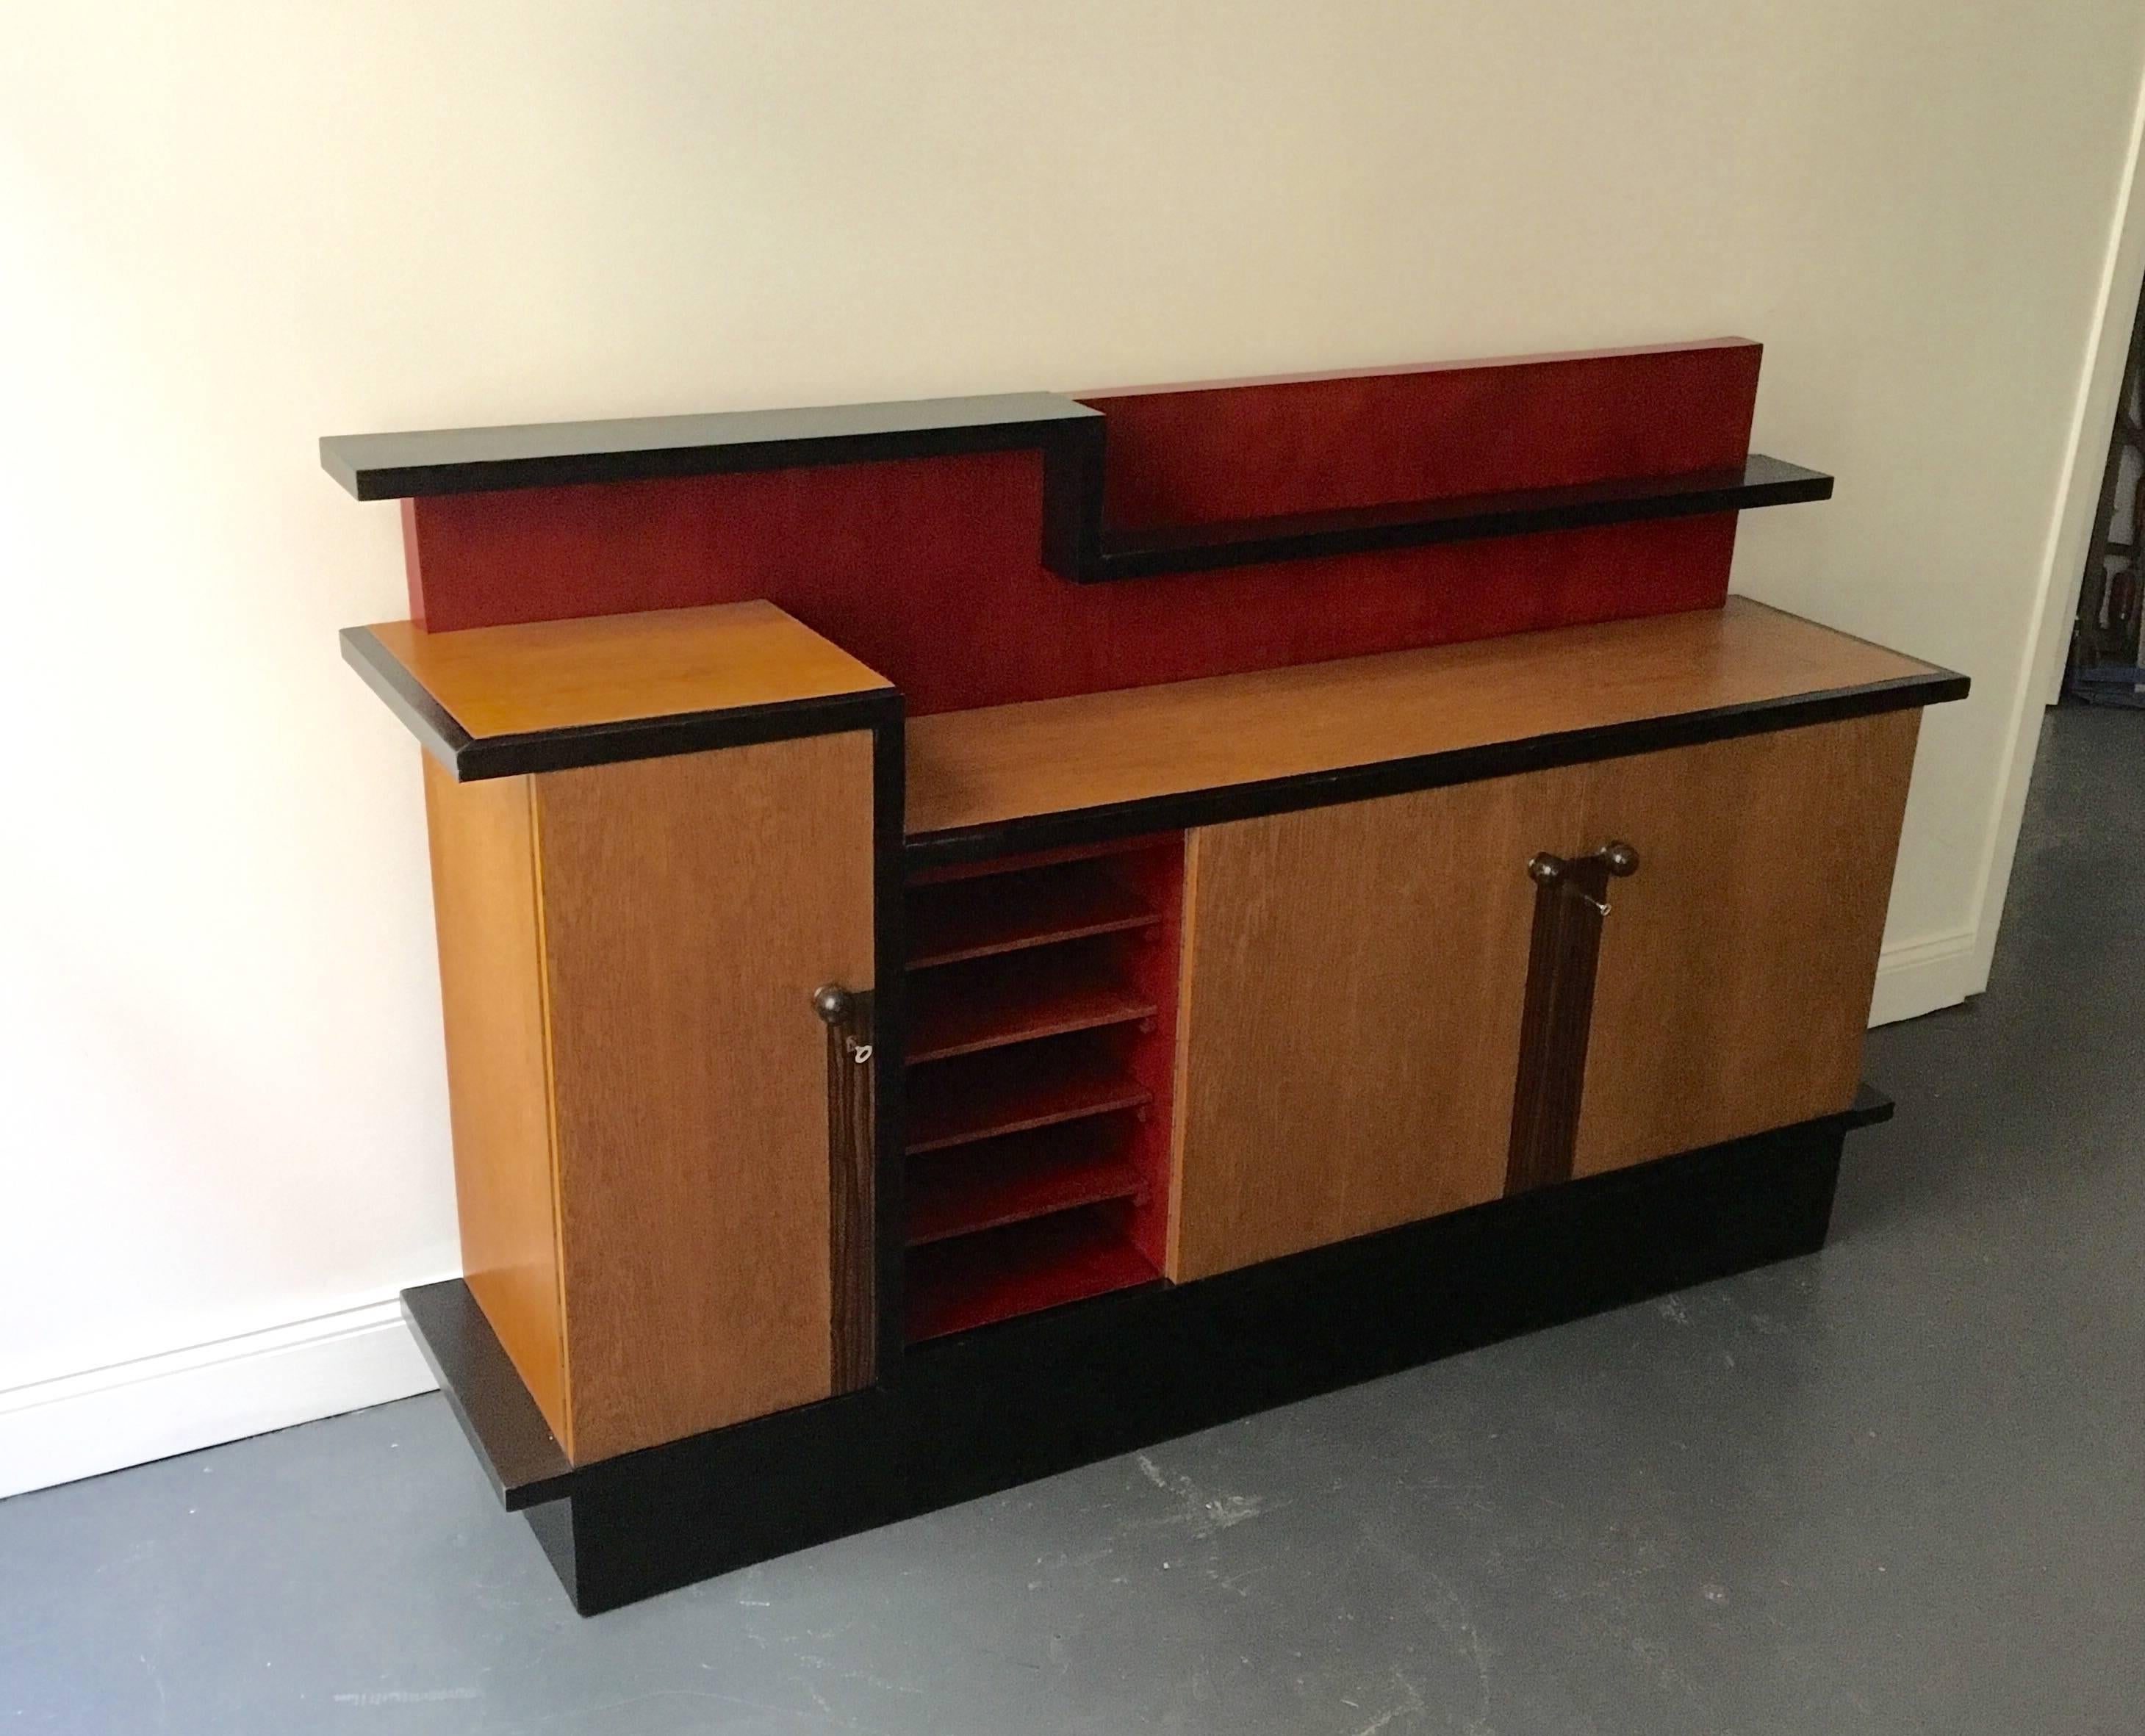 Designer: Coen de Jong
Manufacturer: A.J. Boskamp
   The cabinet is made of oak and coromandel with ebonized and red stain wood. The asymmetrical cabinet has three doors that open to shelves and in addition, red exposed shelves visible in